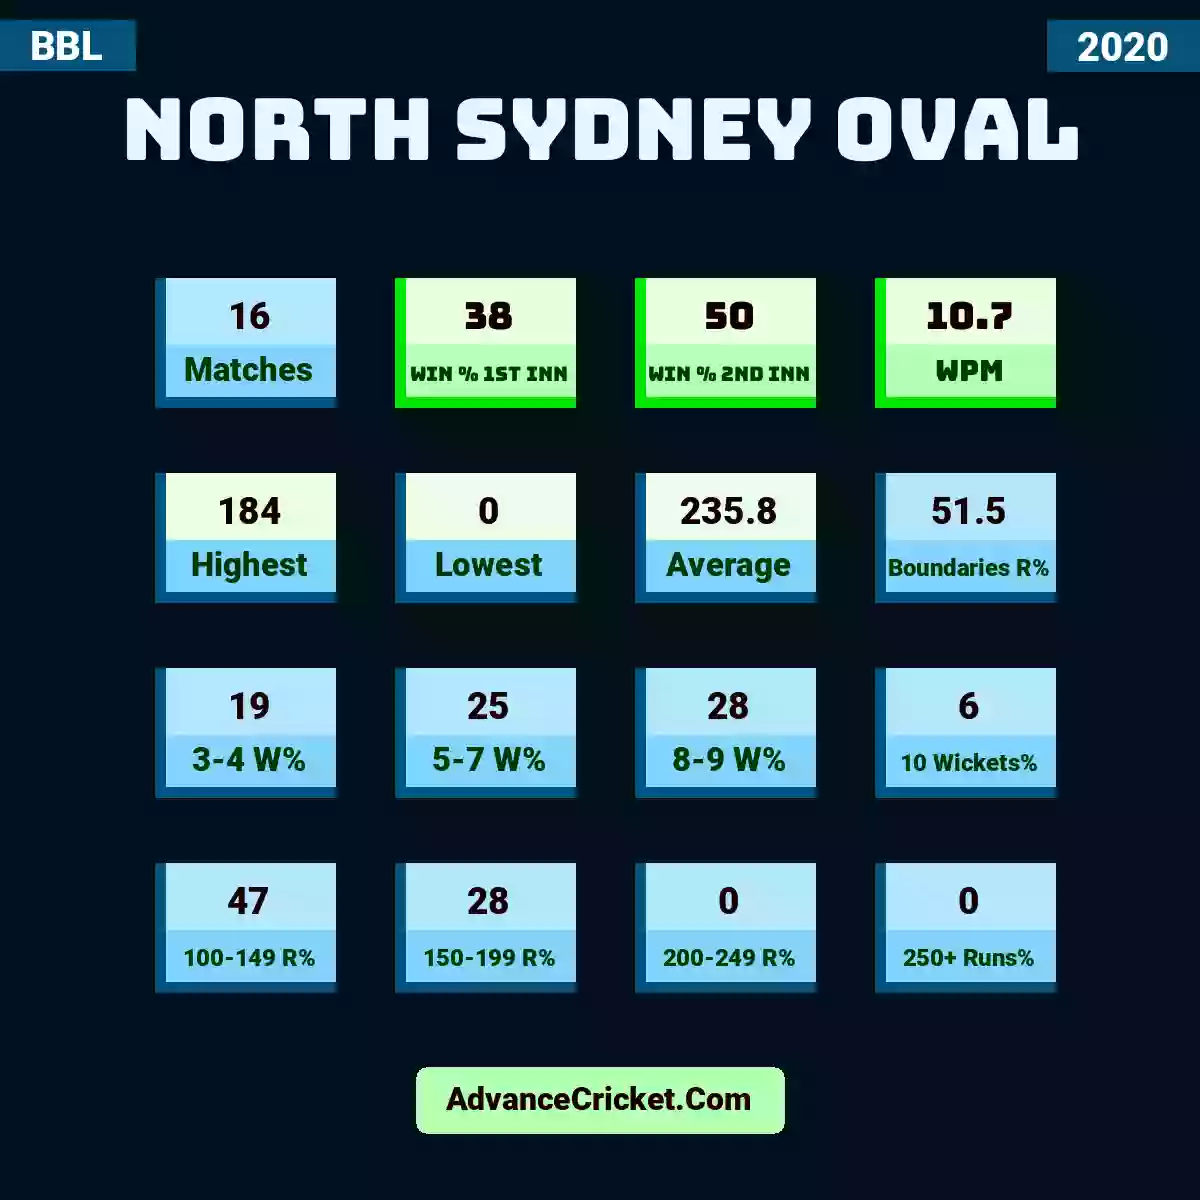 Image showing North Sydney Oval with Matches: 16, Win % 1st Inn: 38, Win % 2nd Inn: 50, WPM: 10.7, Highest: 184, Lowest: 0, Average: 235.8, Boundaries R%: 51.5, 3-4 W%: 19, 5-7 W%: 25, 8-9 W%: 28, 10 Wickets%: 6, 100-149 R%: 47, 150-199 R%: 28, 200-249 R%: 0, 250+ Runs%: 0.